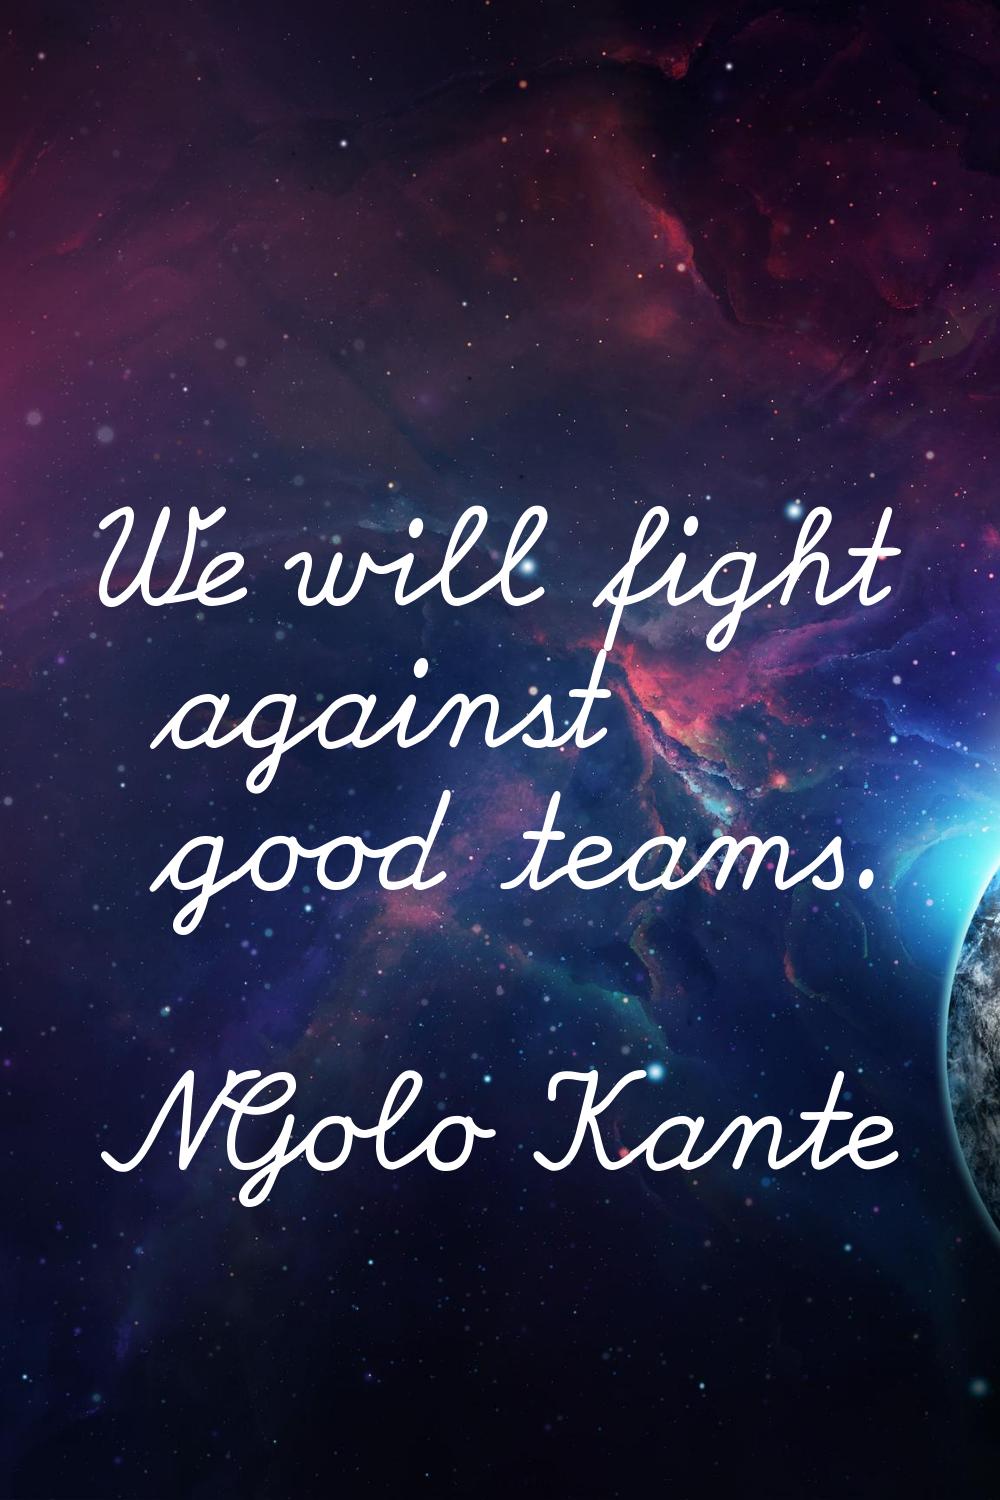 We will fight against good teams.